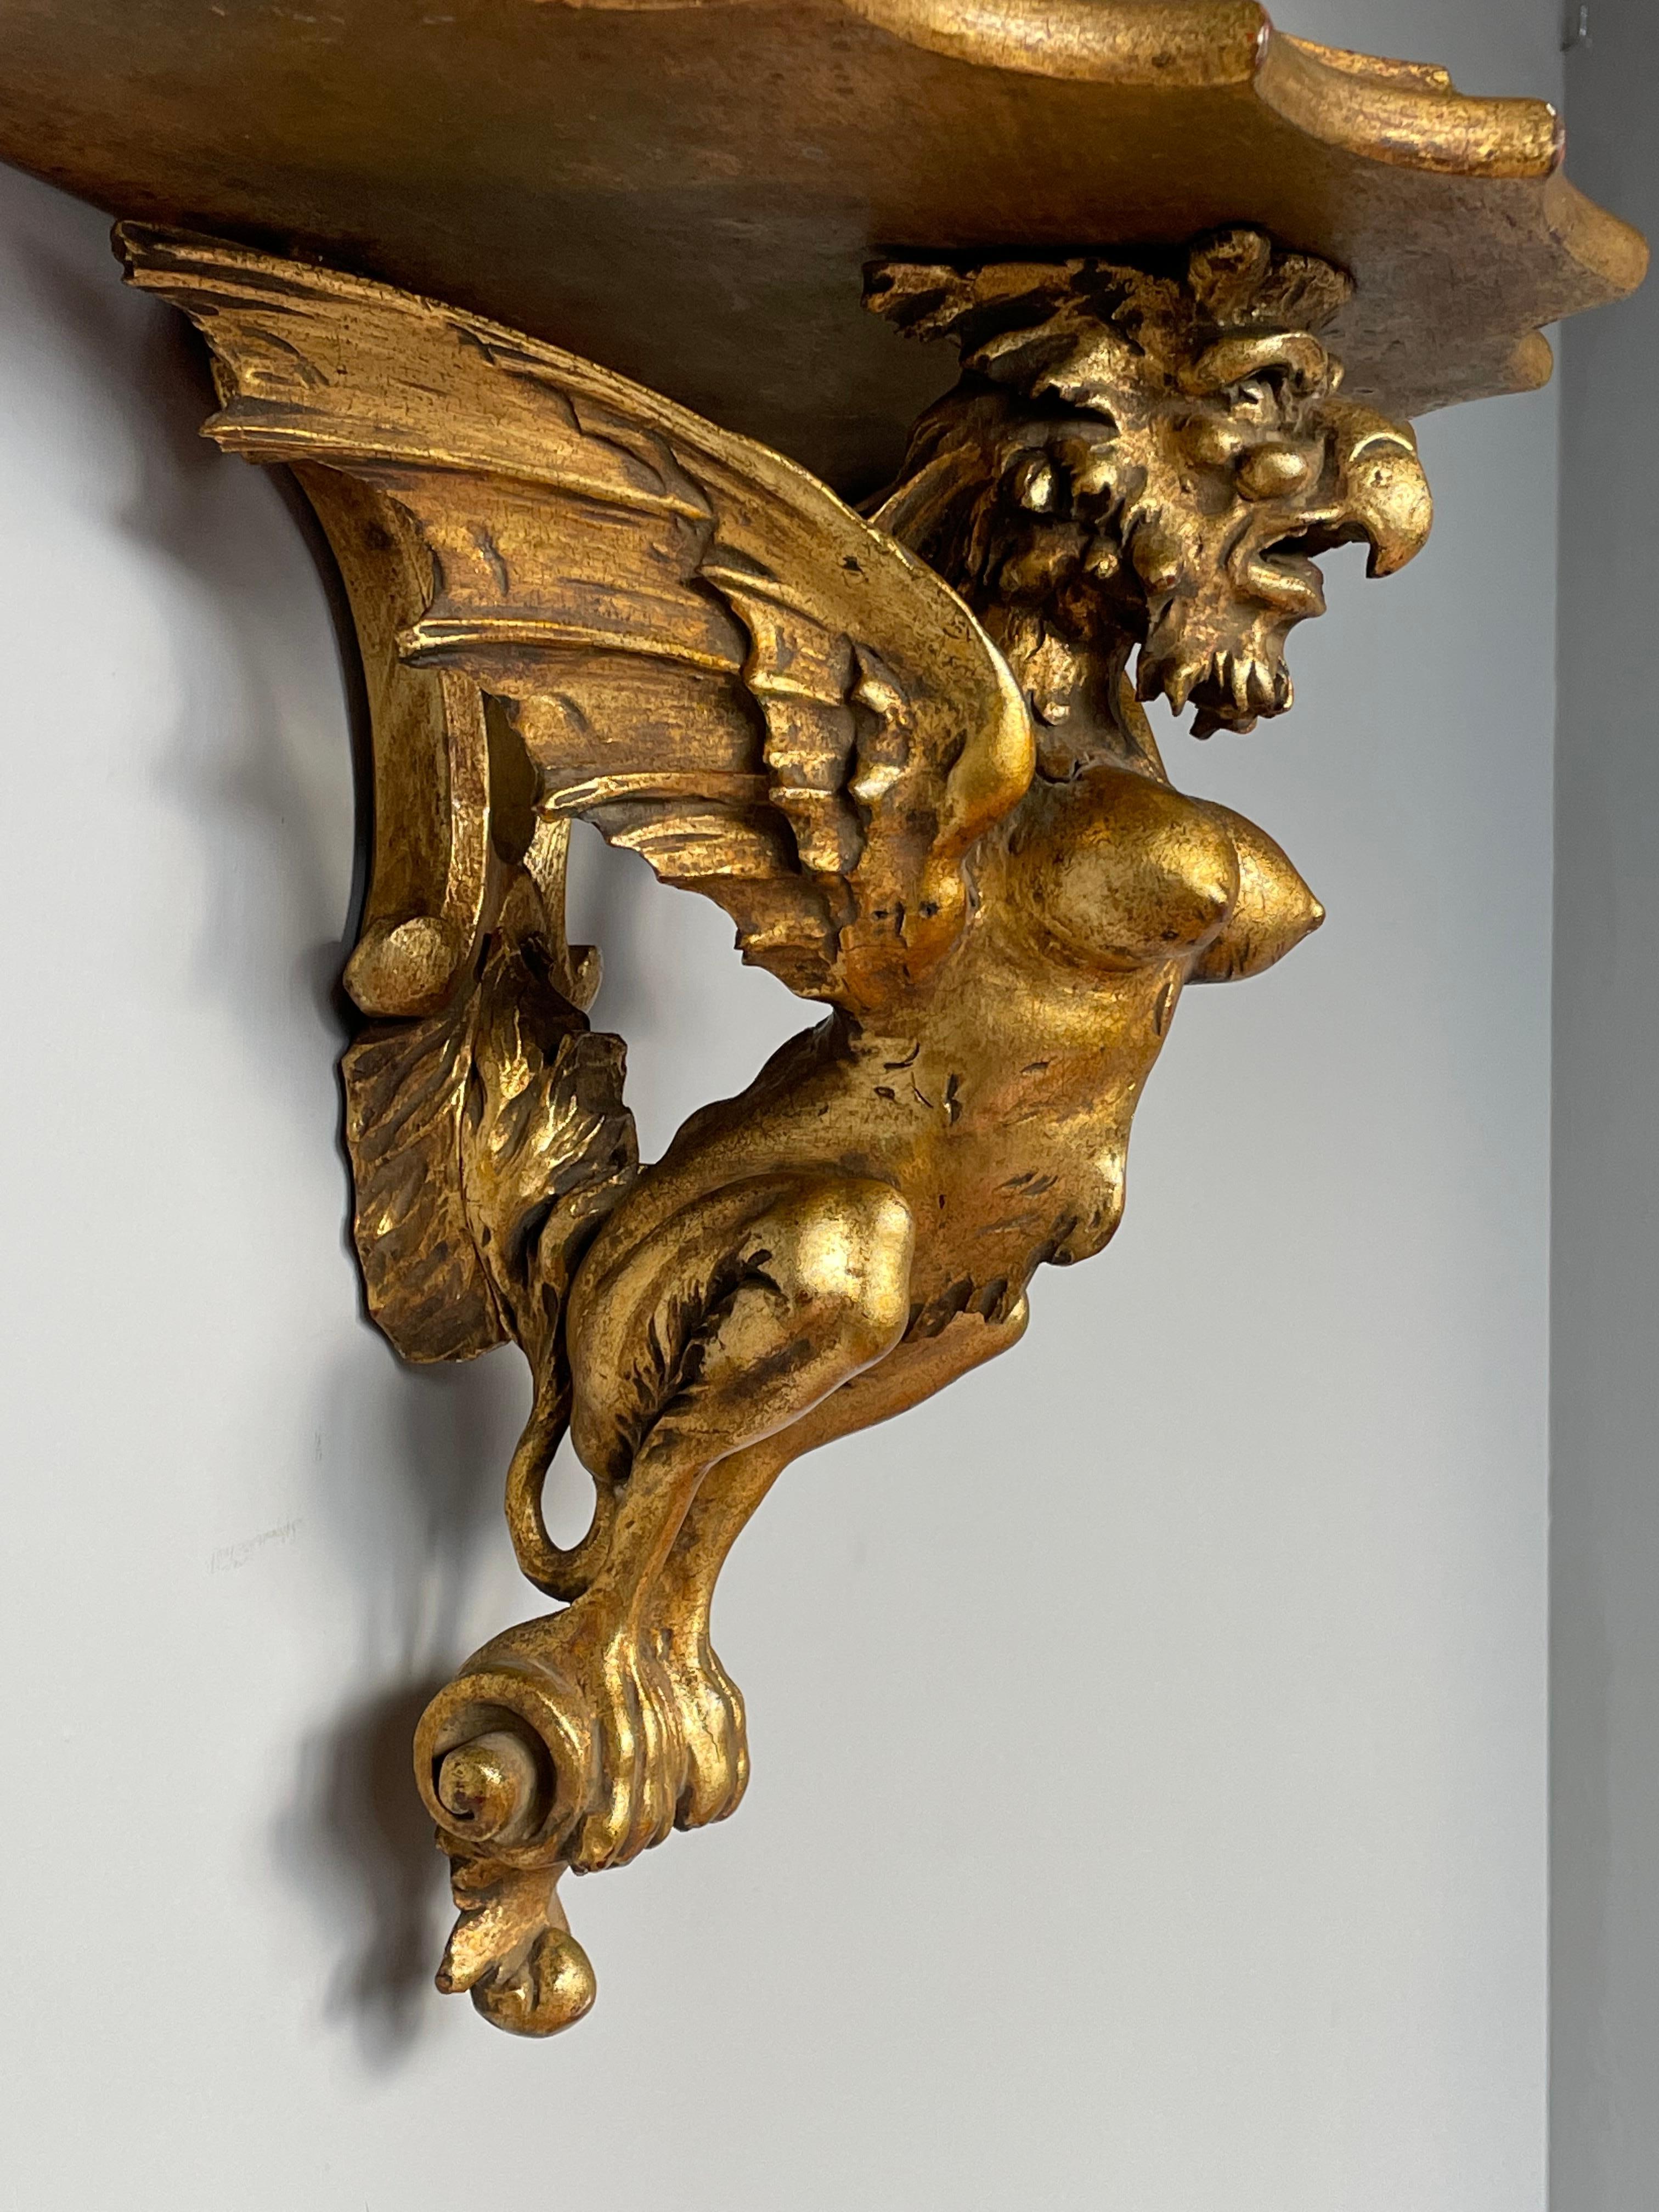 Stunning and amazingly hand carved, Gothic gargoyle bracket.

If you are a collector of rare and striking Gothic antiques then this bracket could be the perfect addition to your collection. This all handcrafted and marvellously hand carved antique